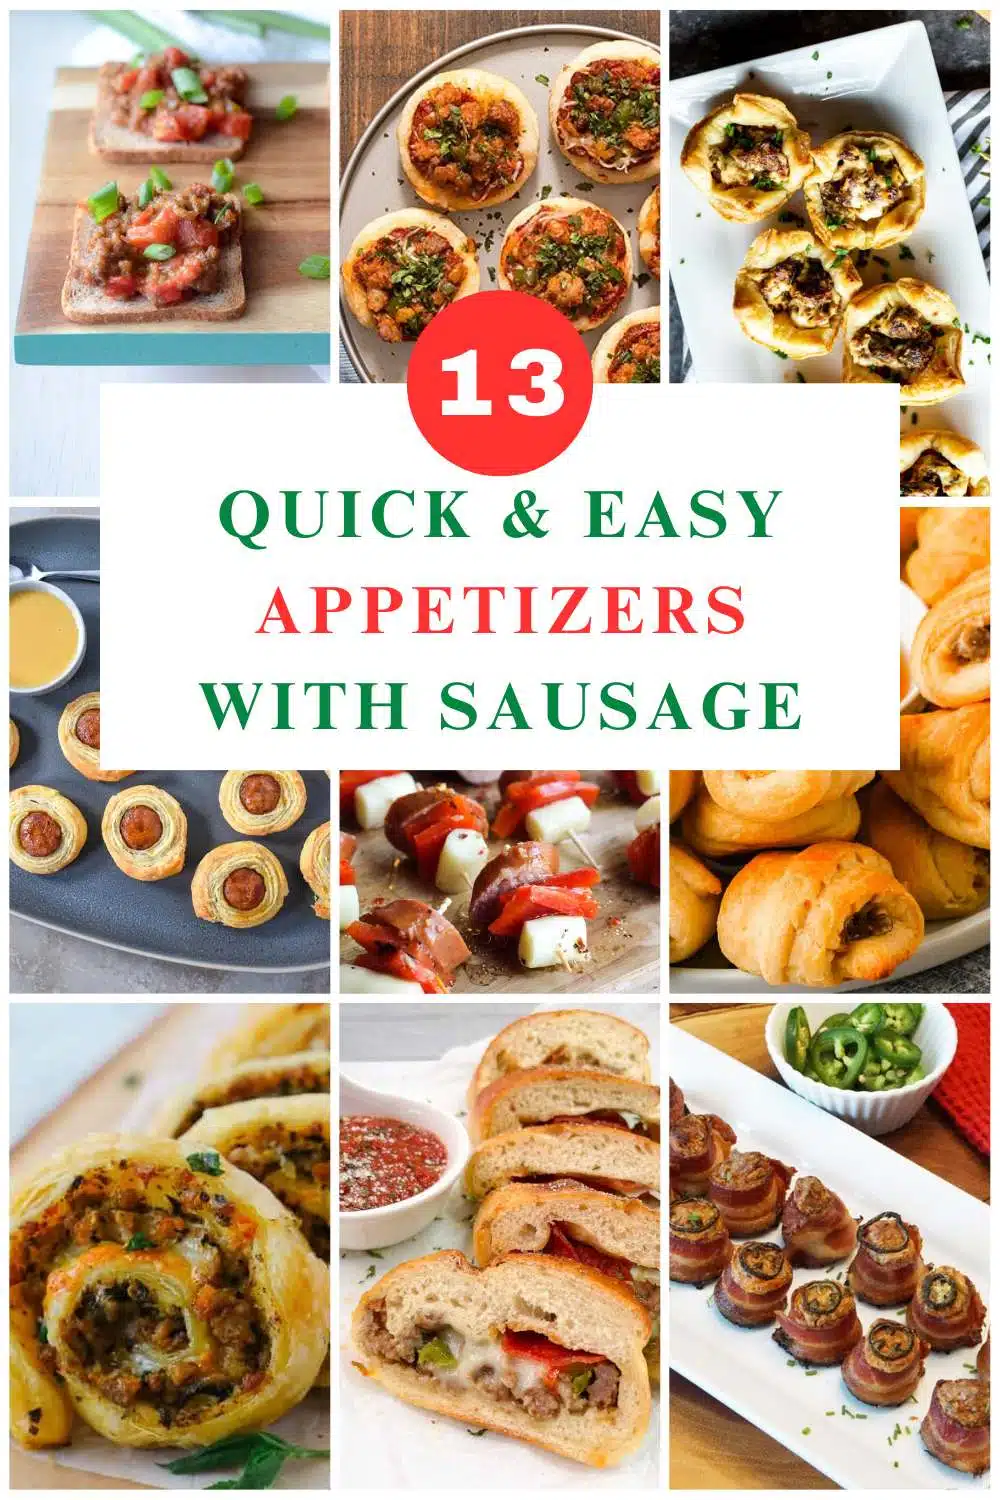 Appetizers with Sausage collage with text